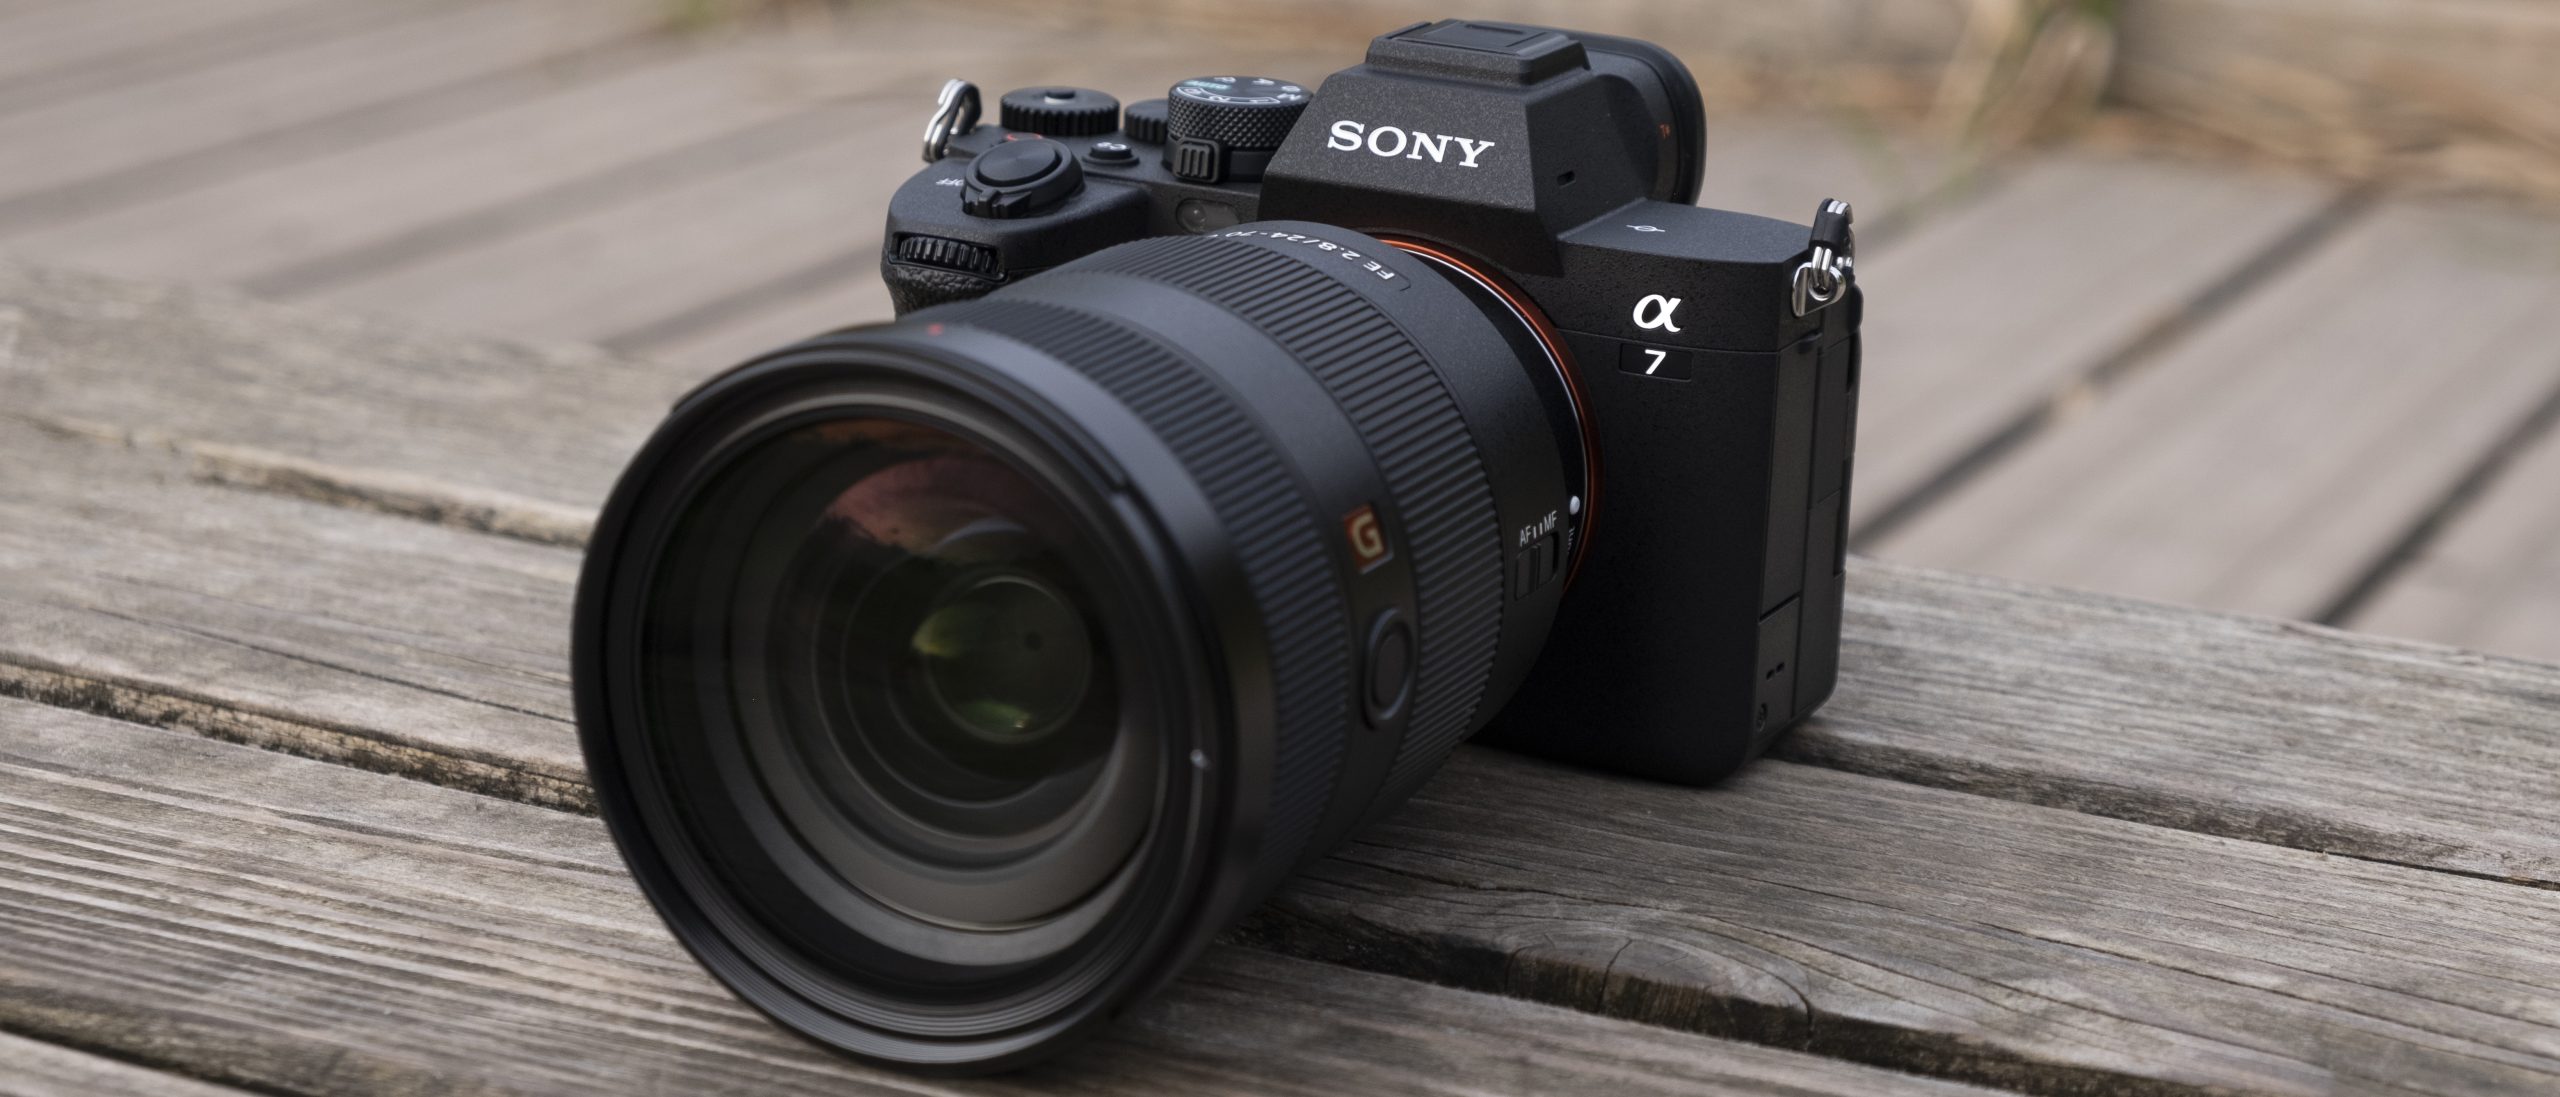 Top 5 Best DSLR Cameras in Singapore